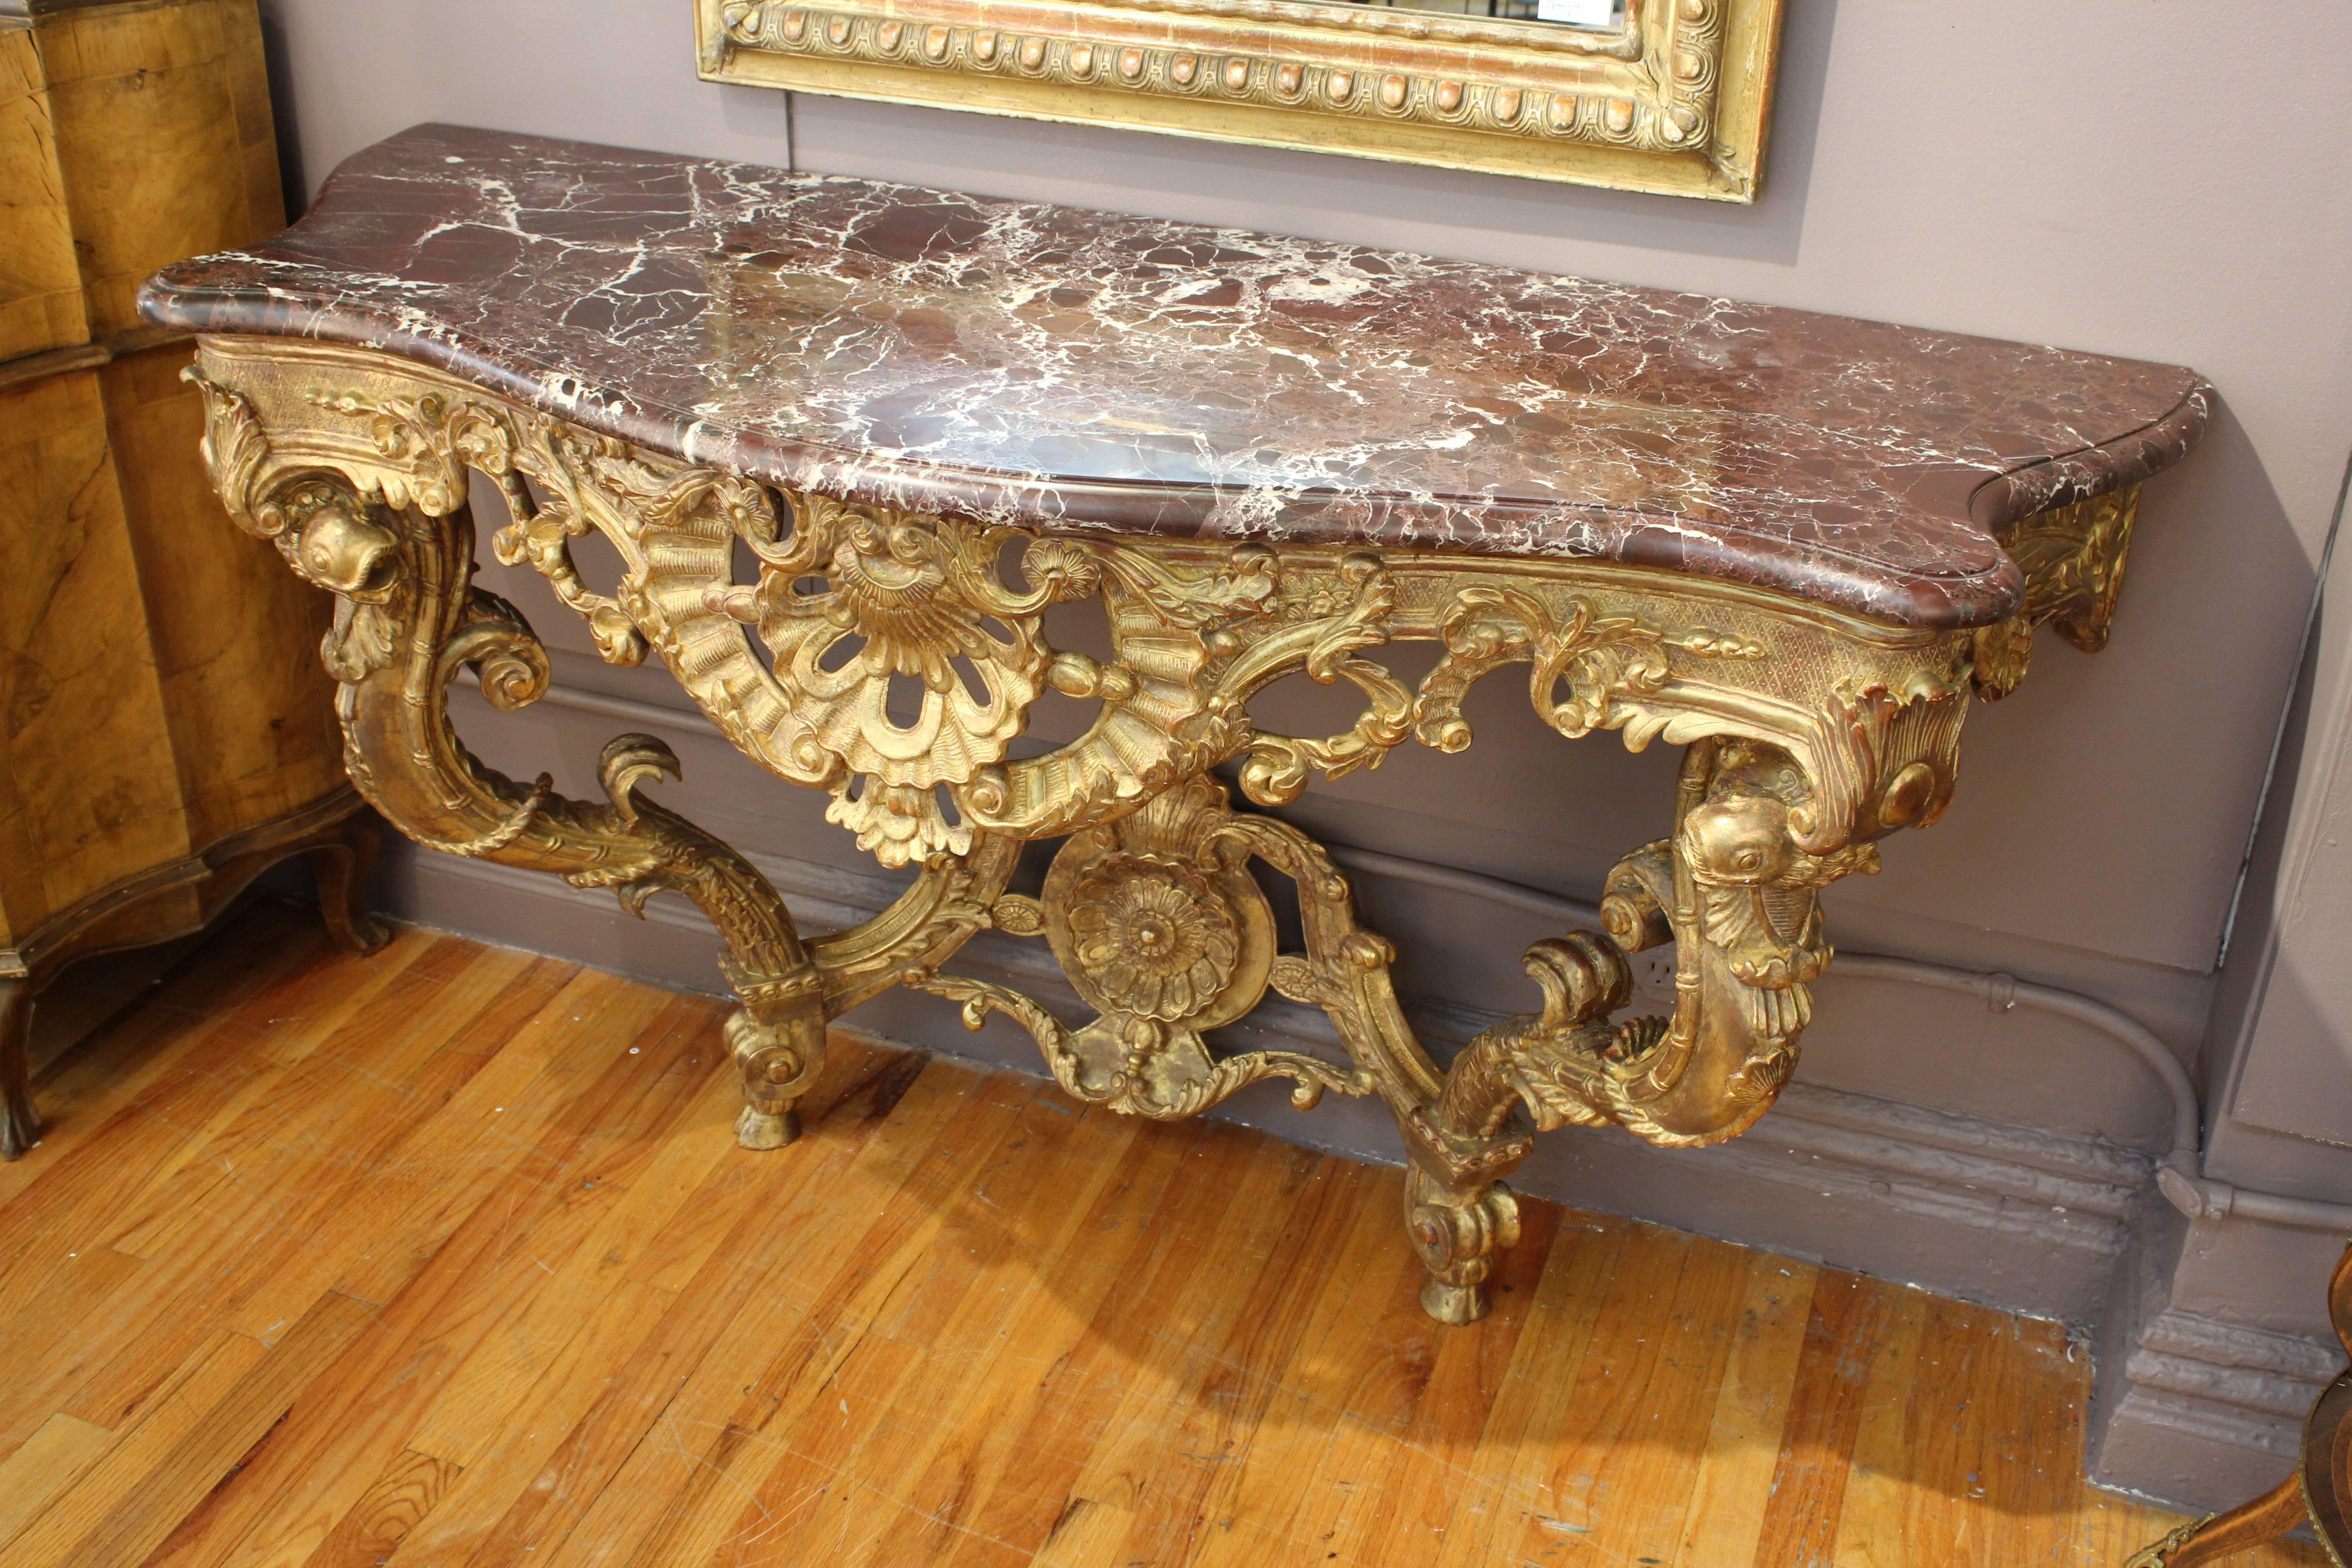 Pair of French giltwood consoles from the late 19th century-early 20th century in the style of Louis XV. Includes custom marble tops in deep red. Bottoms carved in detail with fish, acanthus leaves and large rosettes. Each curved leg stands on a